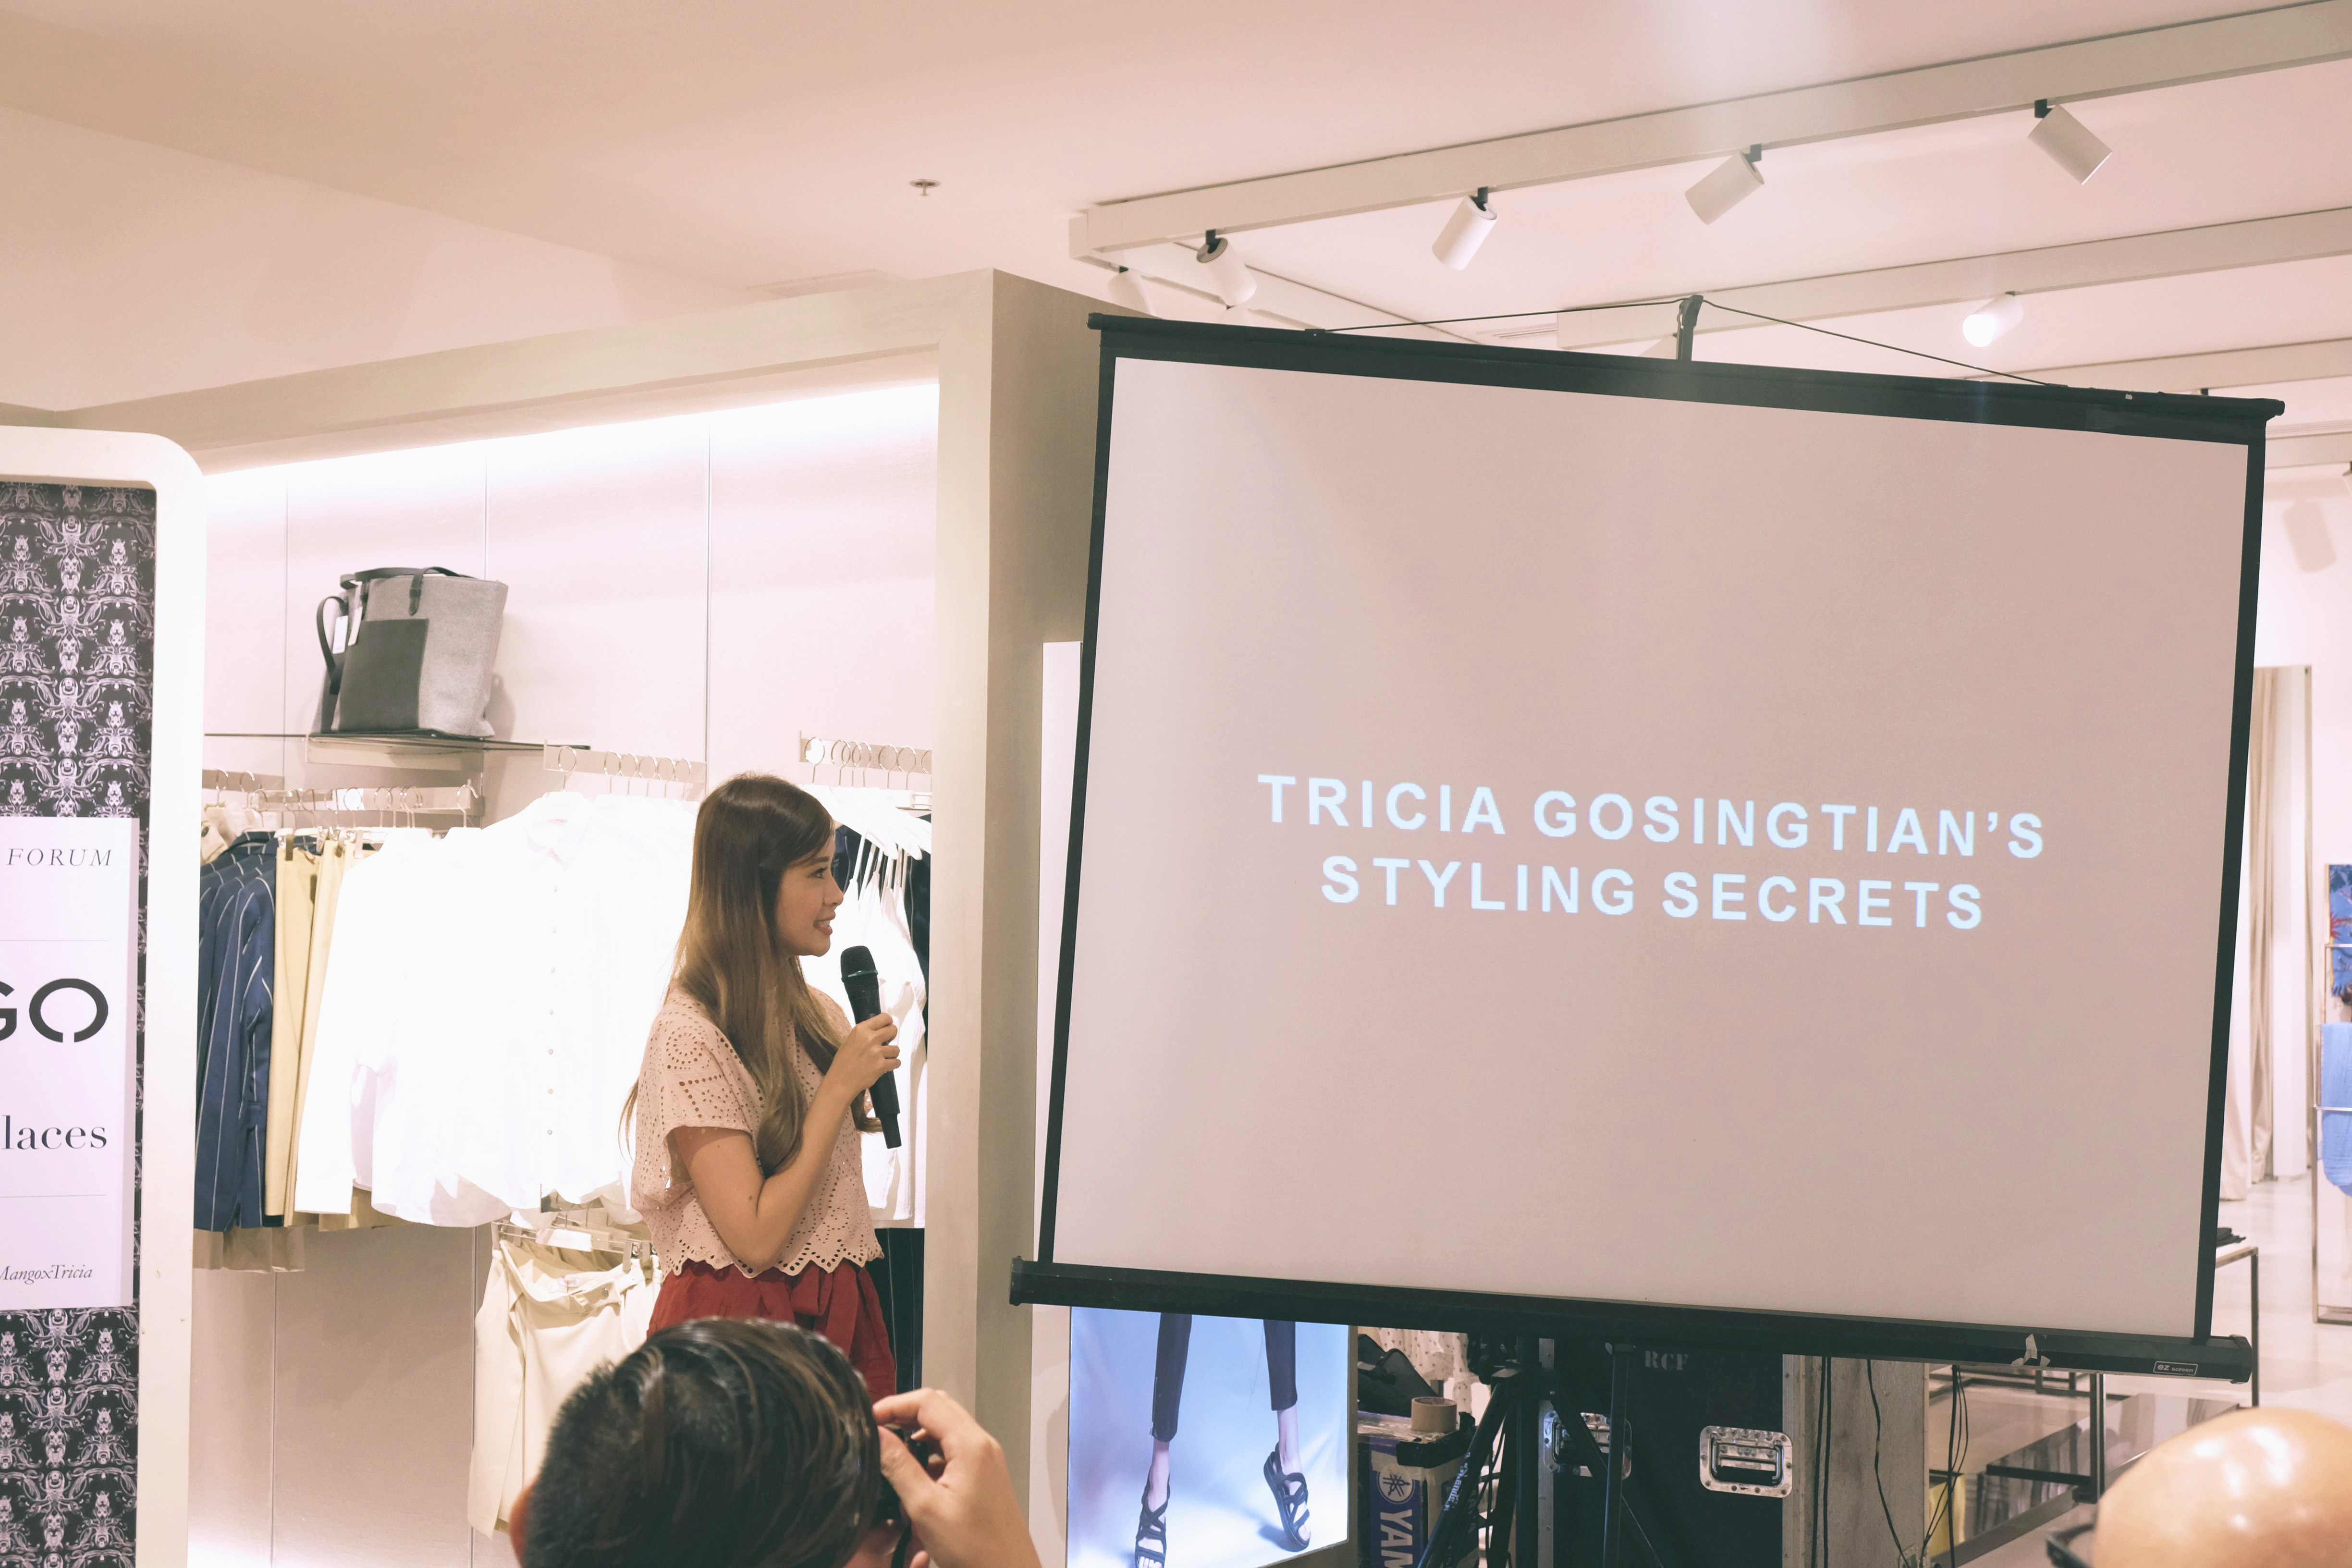 Tricia, sharing her styling secrets.